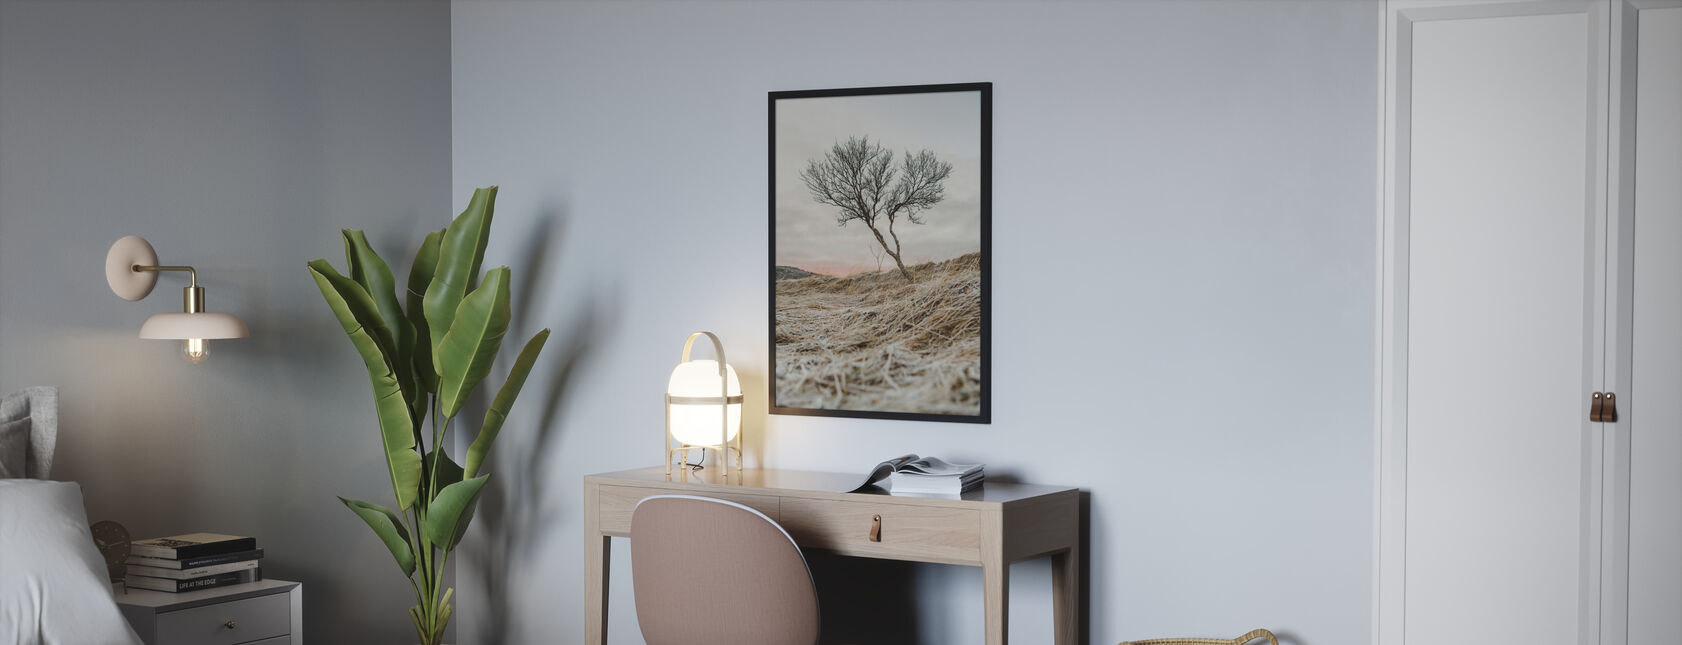 Lonely Tree - Poster - Bedroom